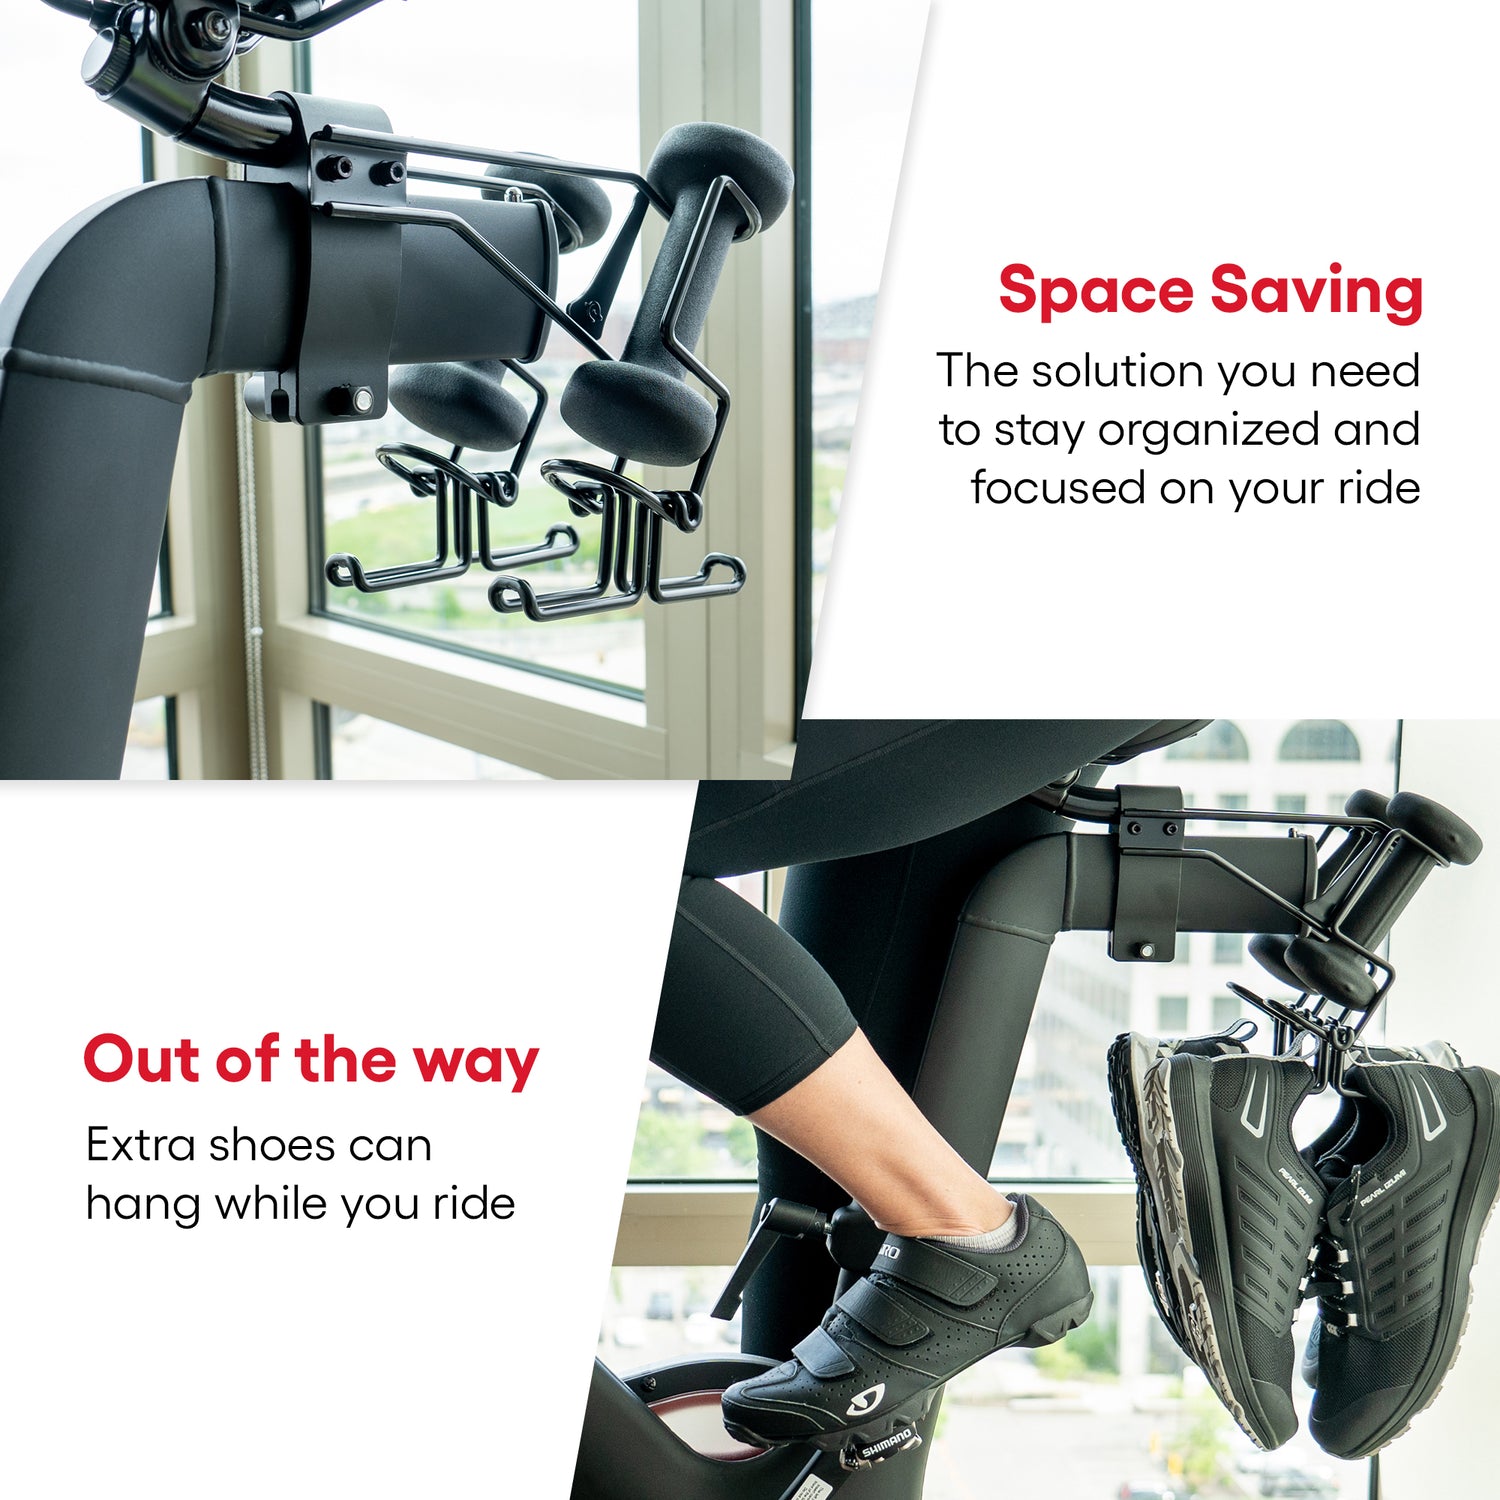 Space saving and out of the way shoe hooks for Peloton.